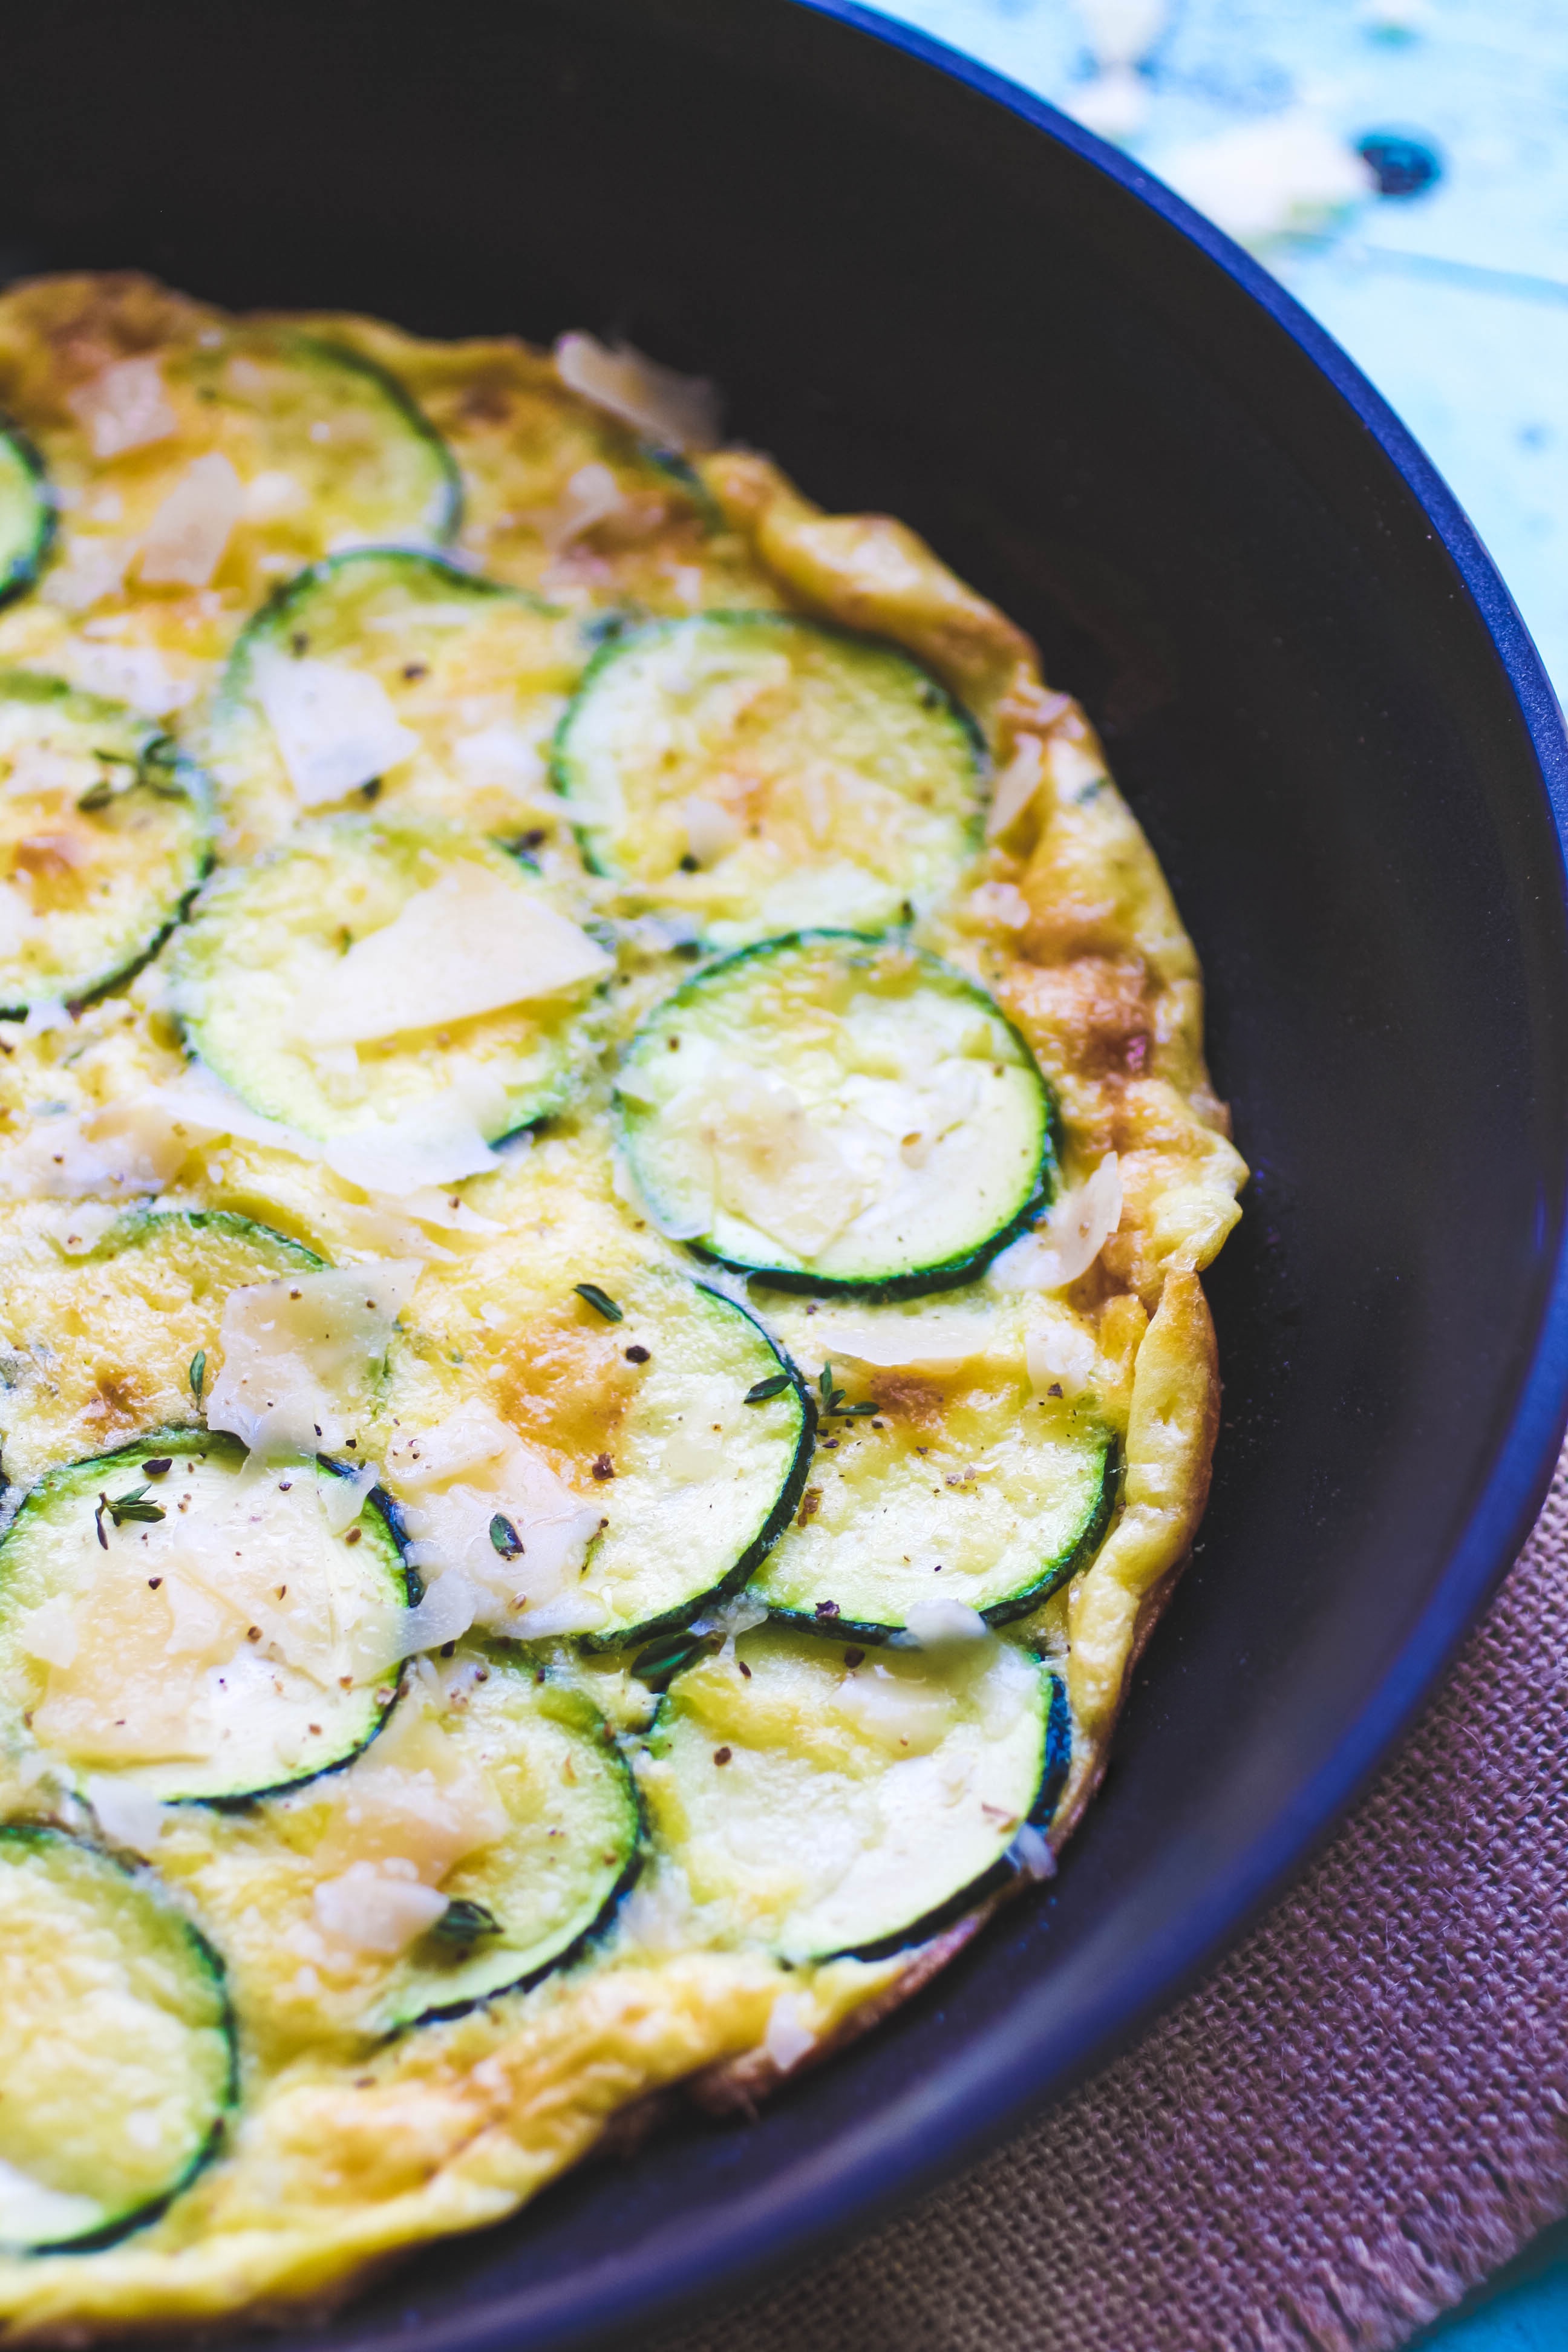 Zucchini-thyme frittata for two the the perfect go-to dish for breakfast. Zucchini-thyme frittata for two makes a great meal anytime of day.